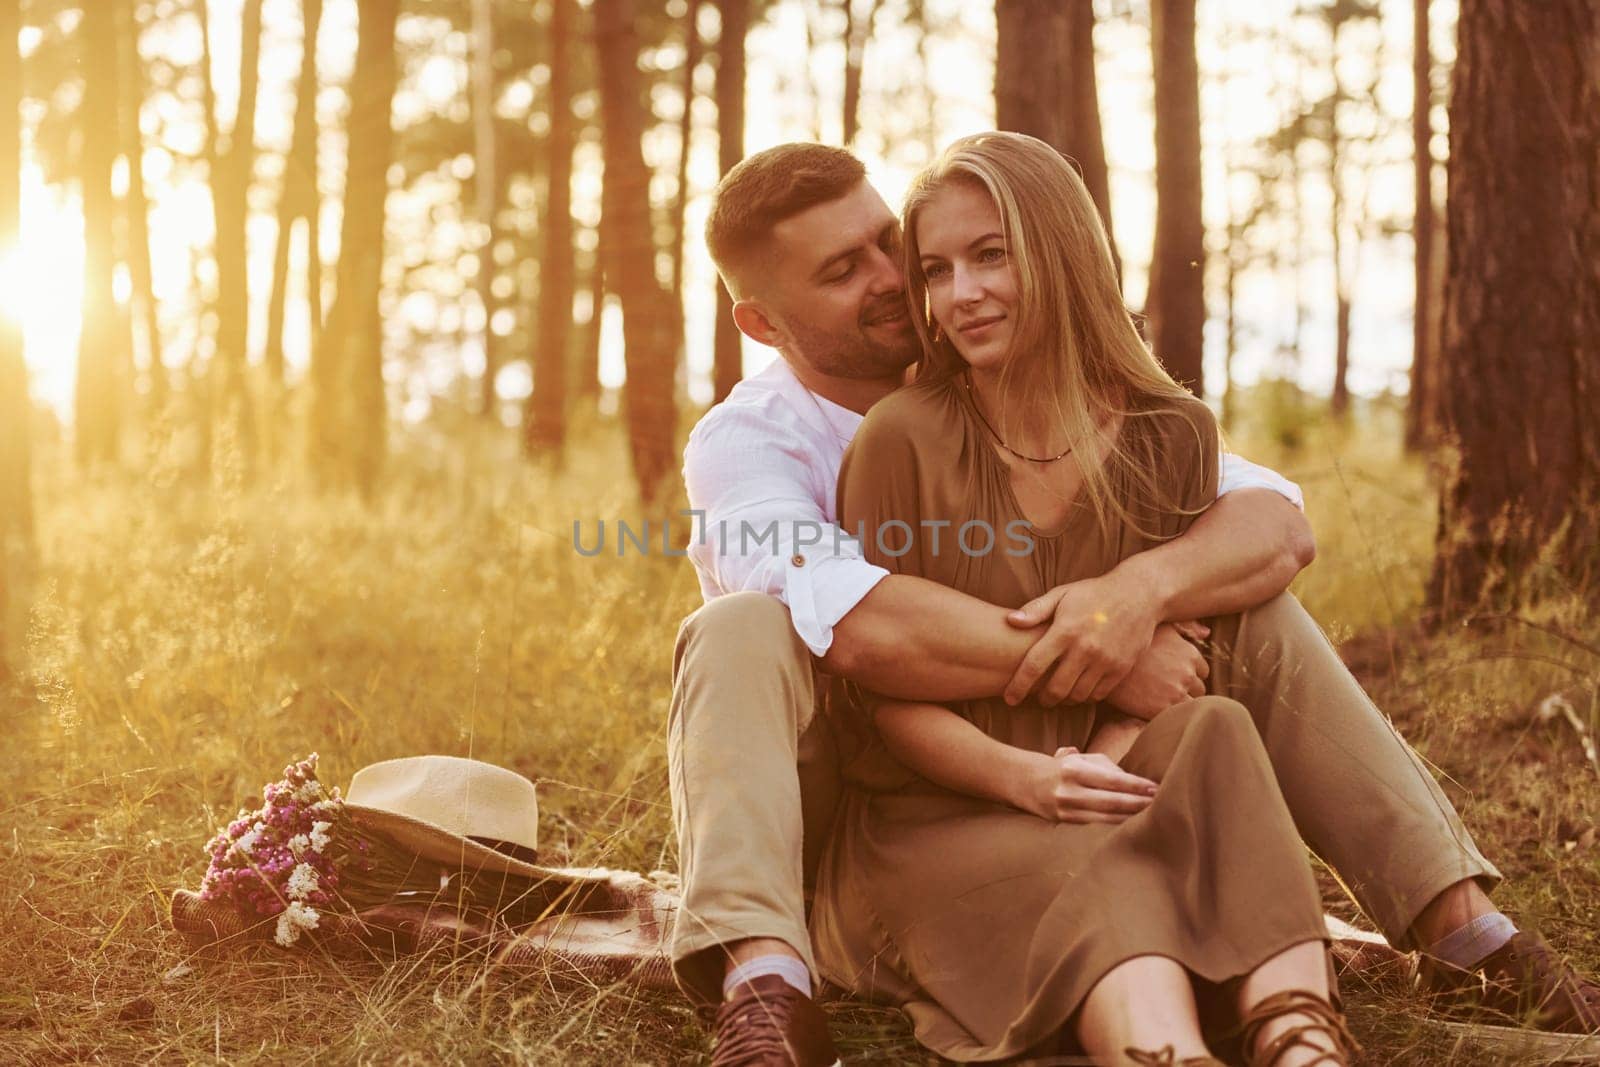 Sitting and embracing each other. Happy couple is outdoors in the forest at daytime.